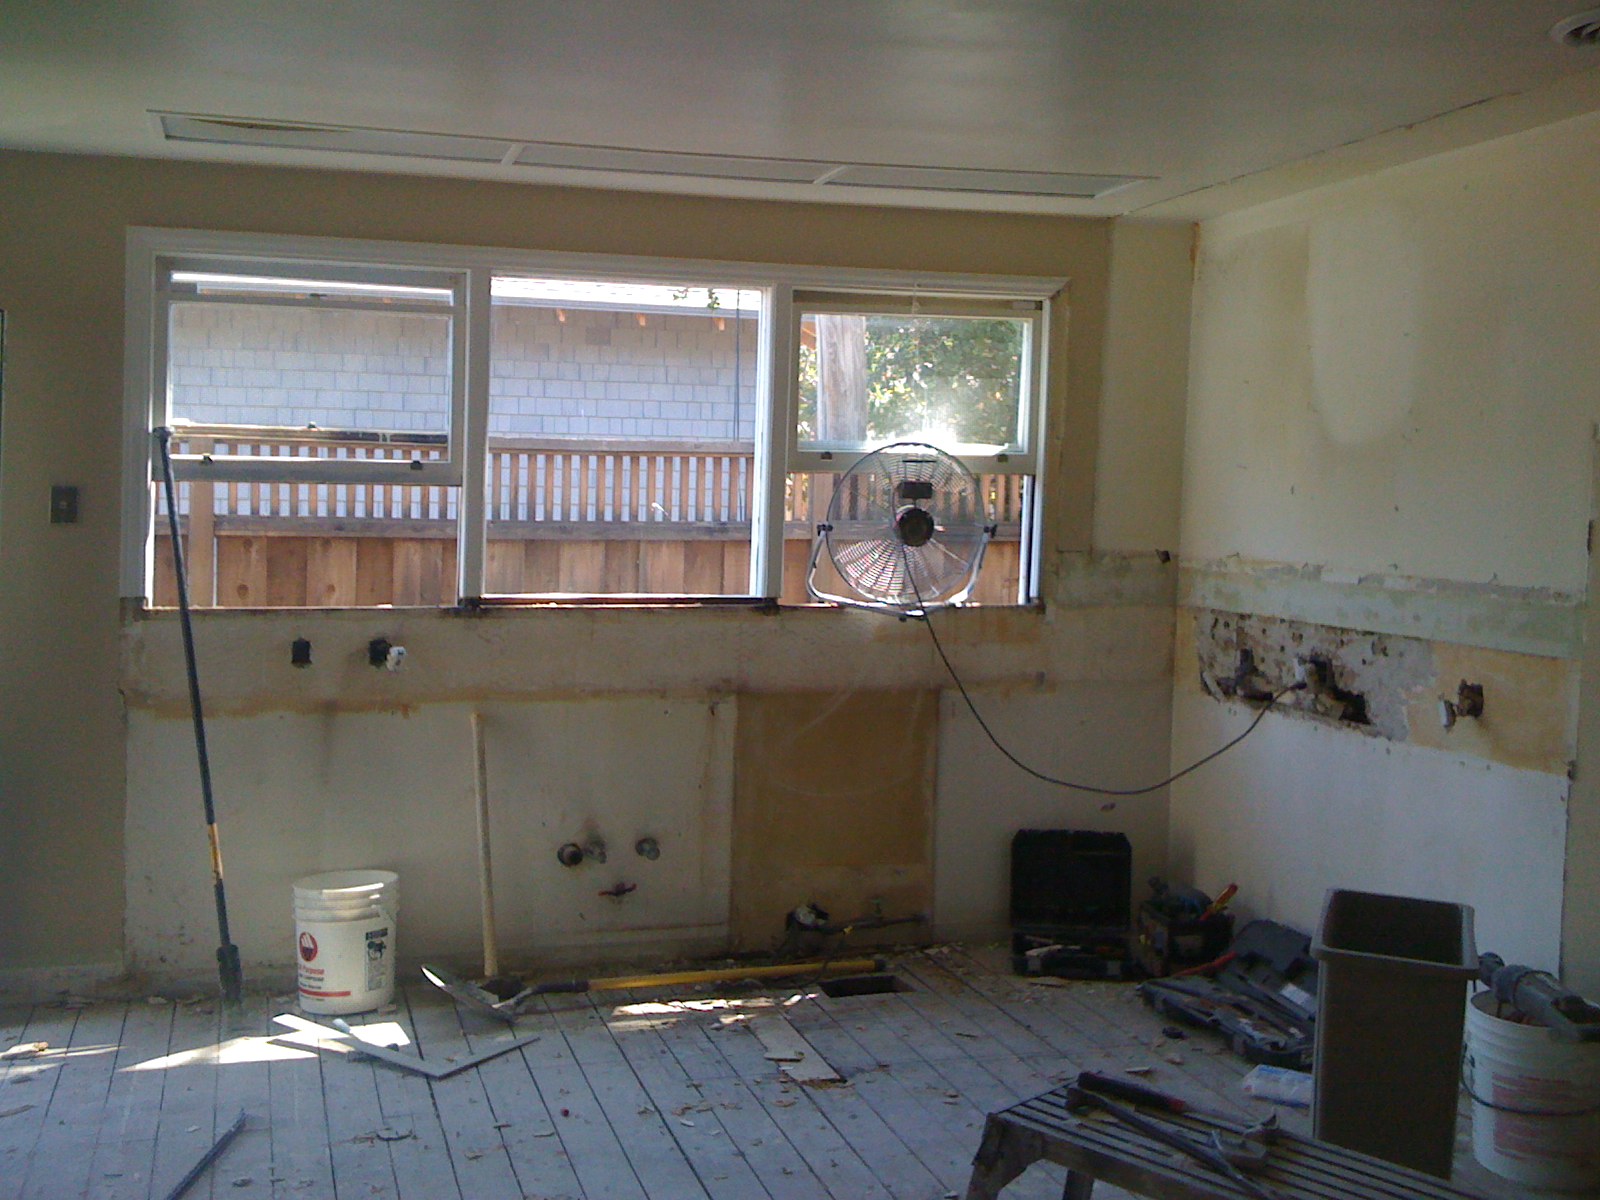 kitchen removed